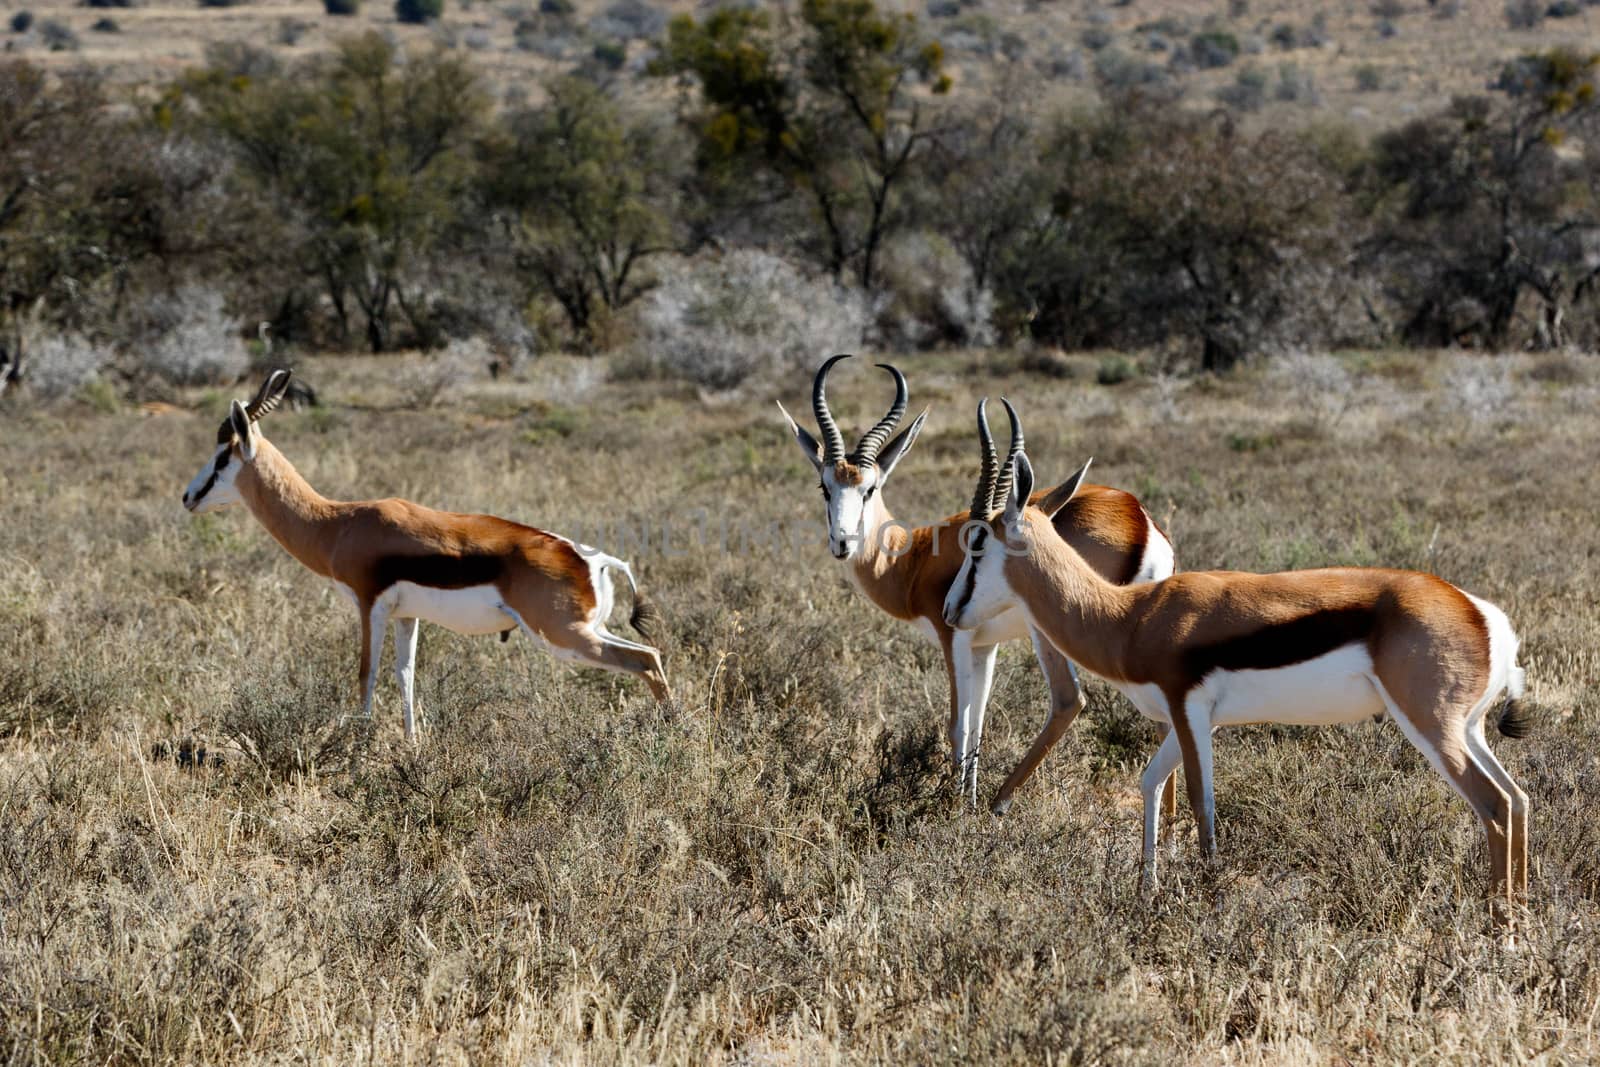 Springbok standing and grazing in the field.